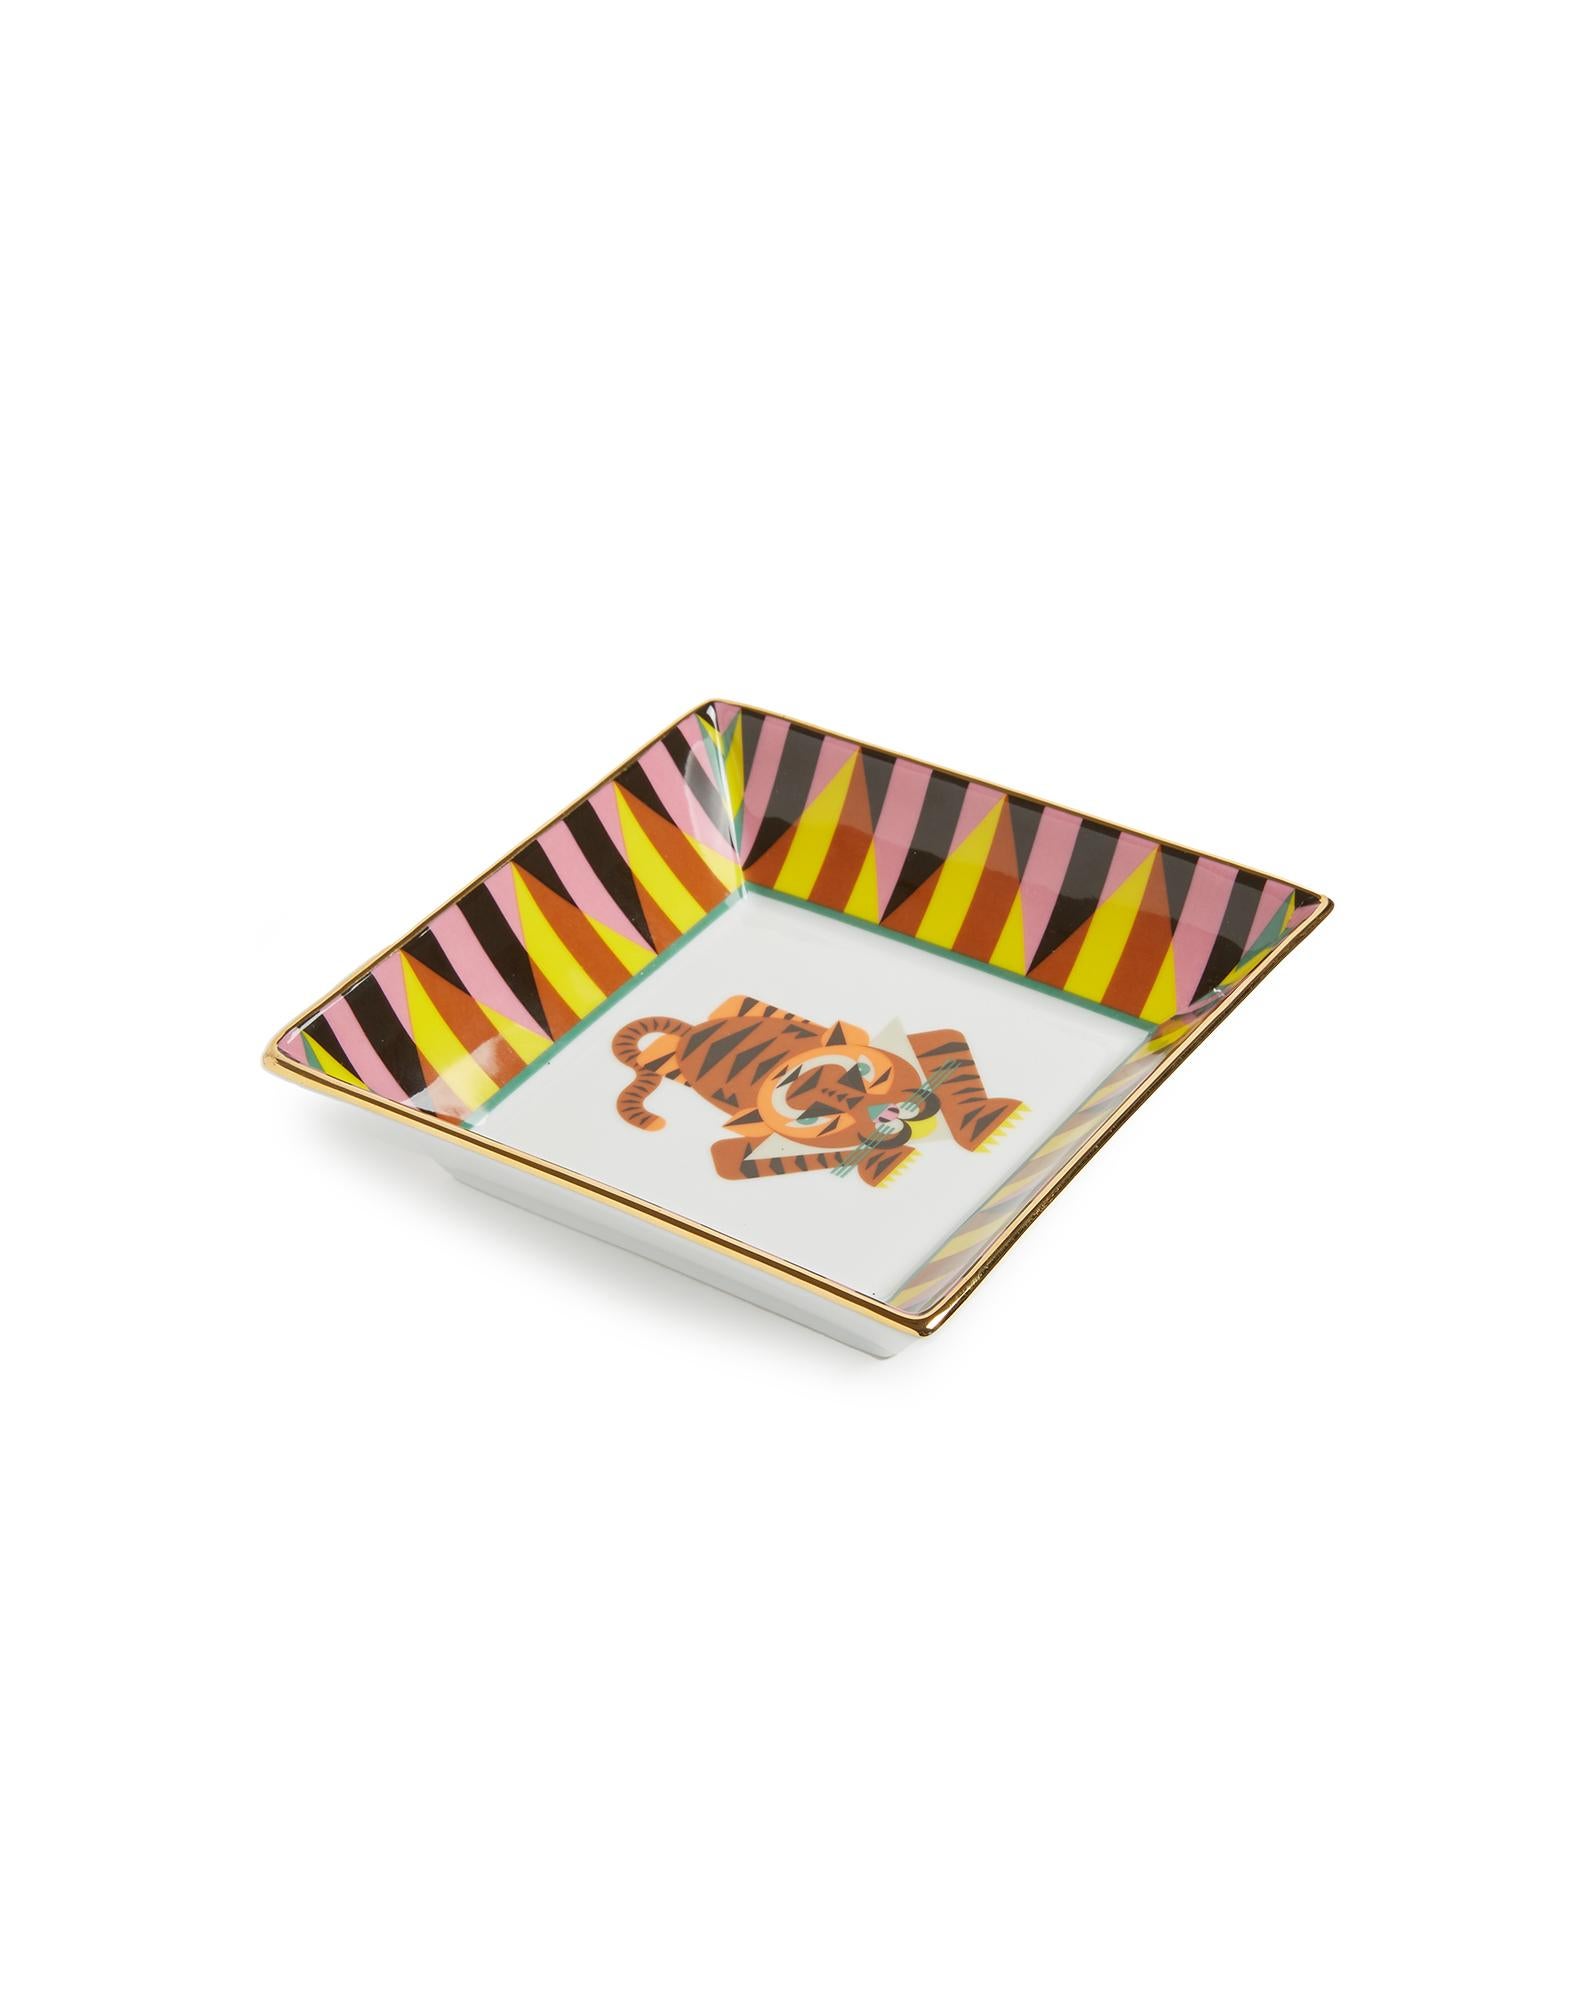 What a dish! This porcelain tray, part of La DoubleJ’s Spirit Animal collection, is designed to do it all and look positively divine. Fill it with nuts, chips or olives for your aperitivo. Put it on your entryway console to catch keys and coins.